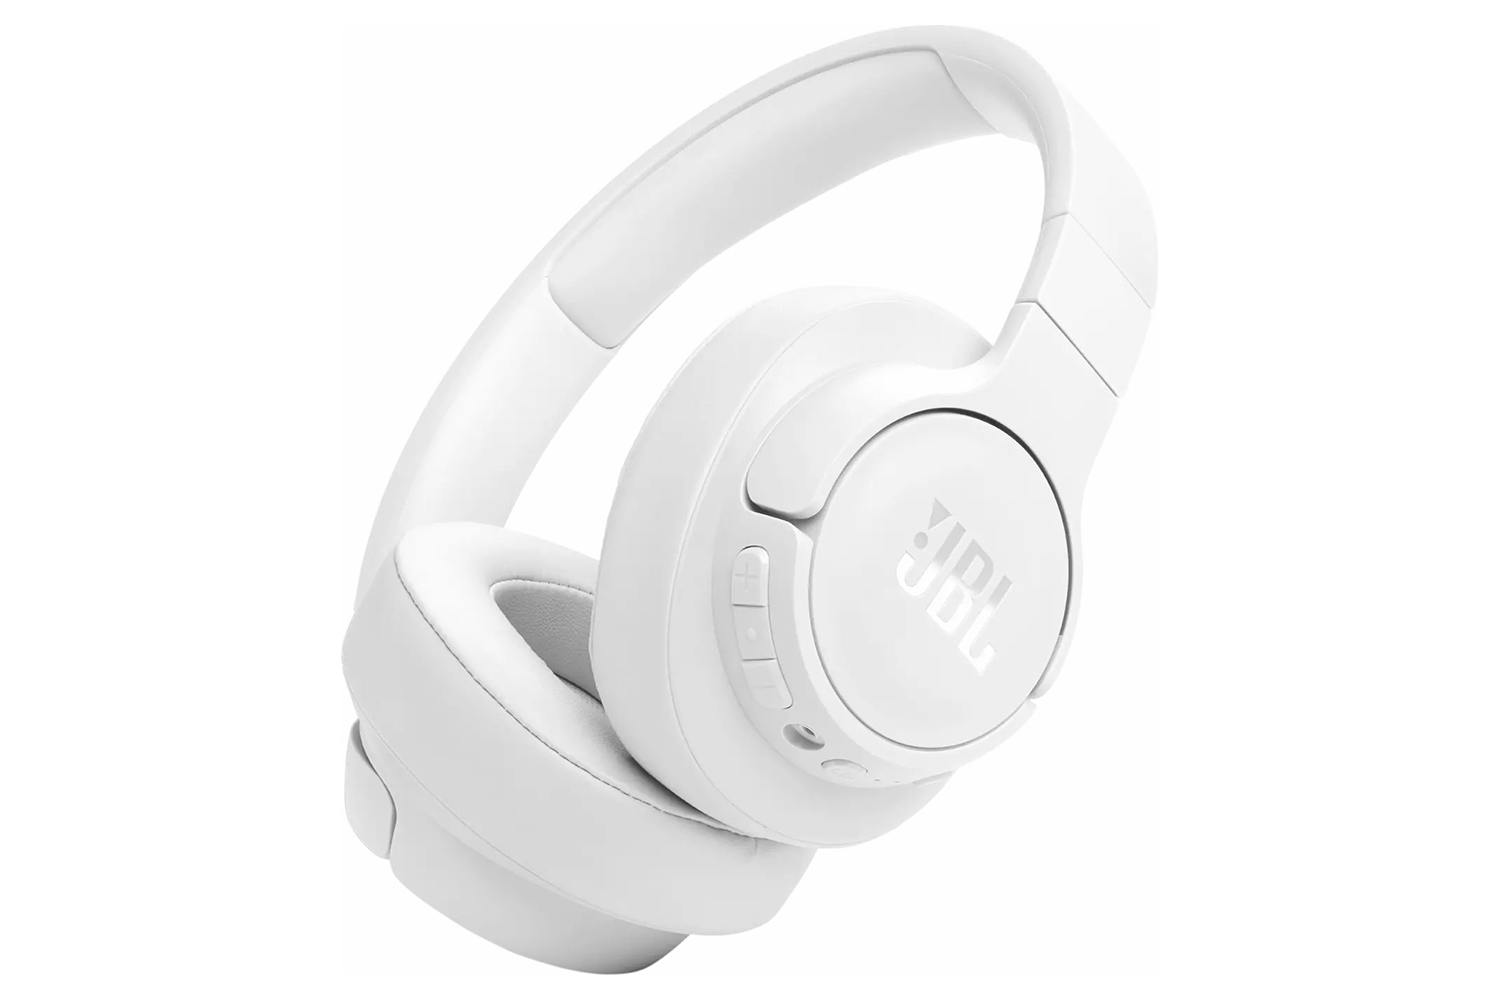 JBL Tune 770NC  Adaptive Noise Cancelling Wireless Over-Ear Headphones